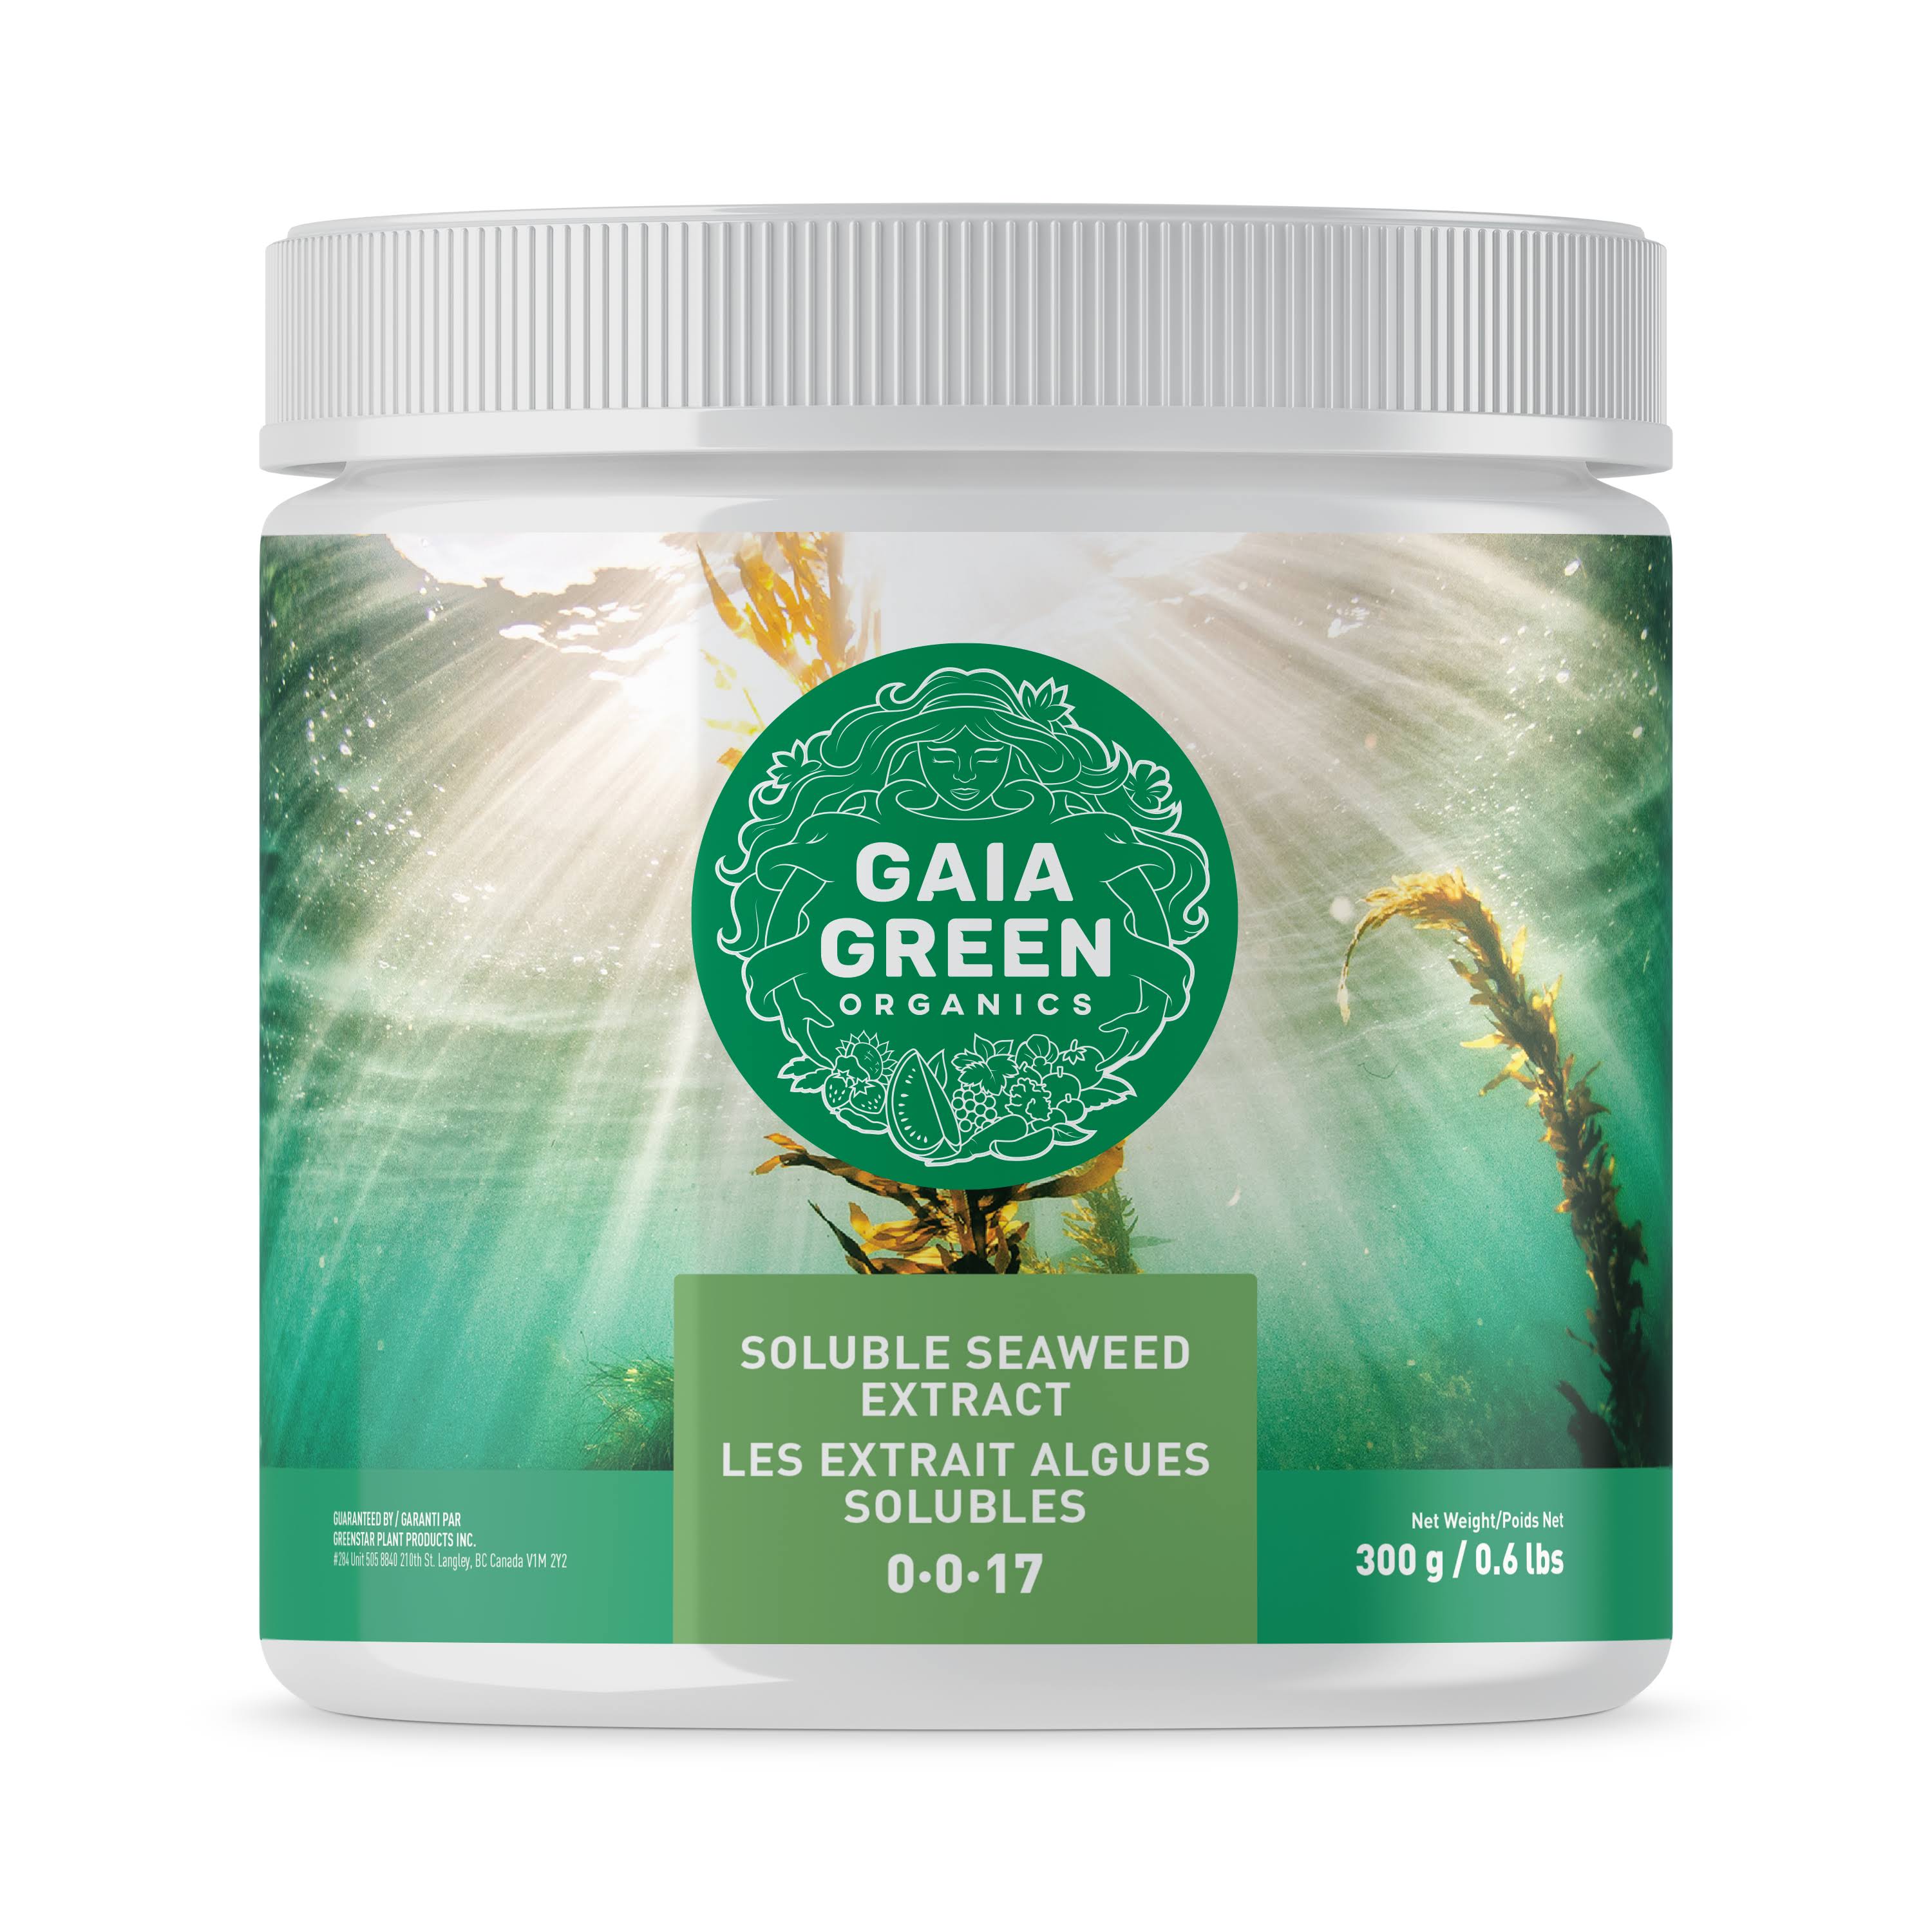 Gaia Green Soluble Seaweed Extract - 1-1-17, 300g